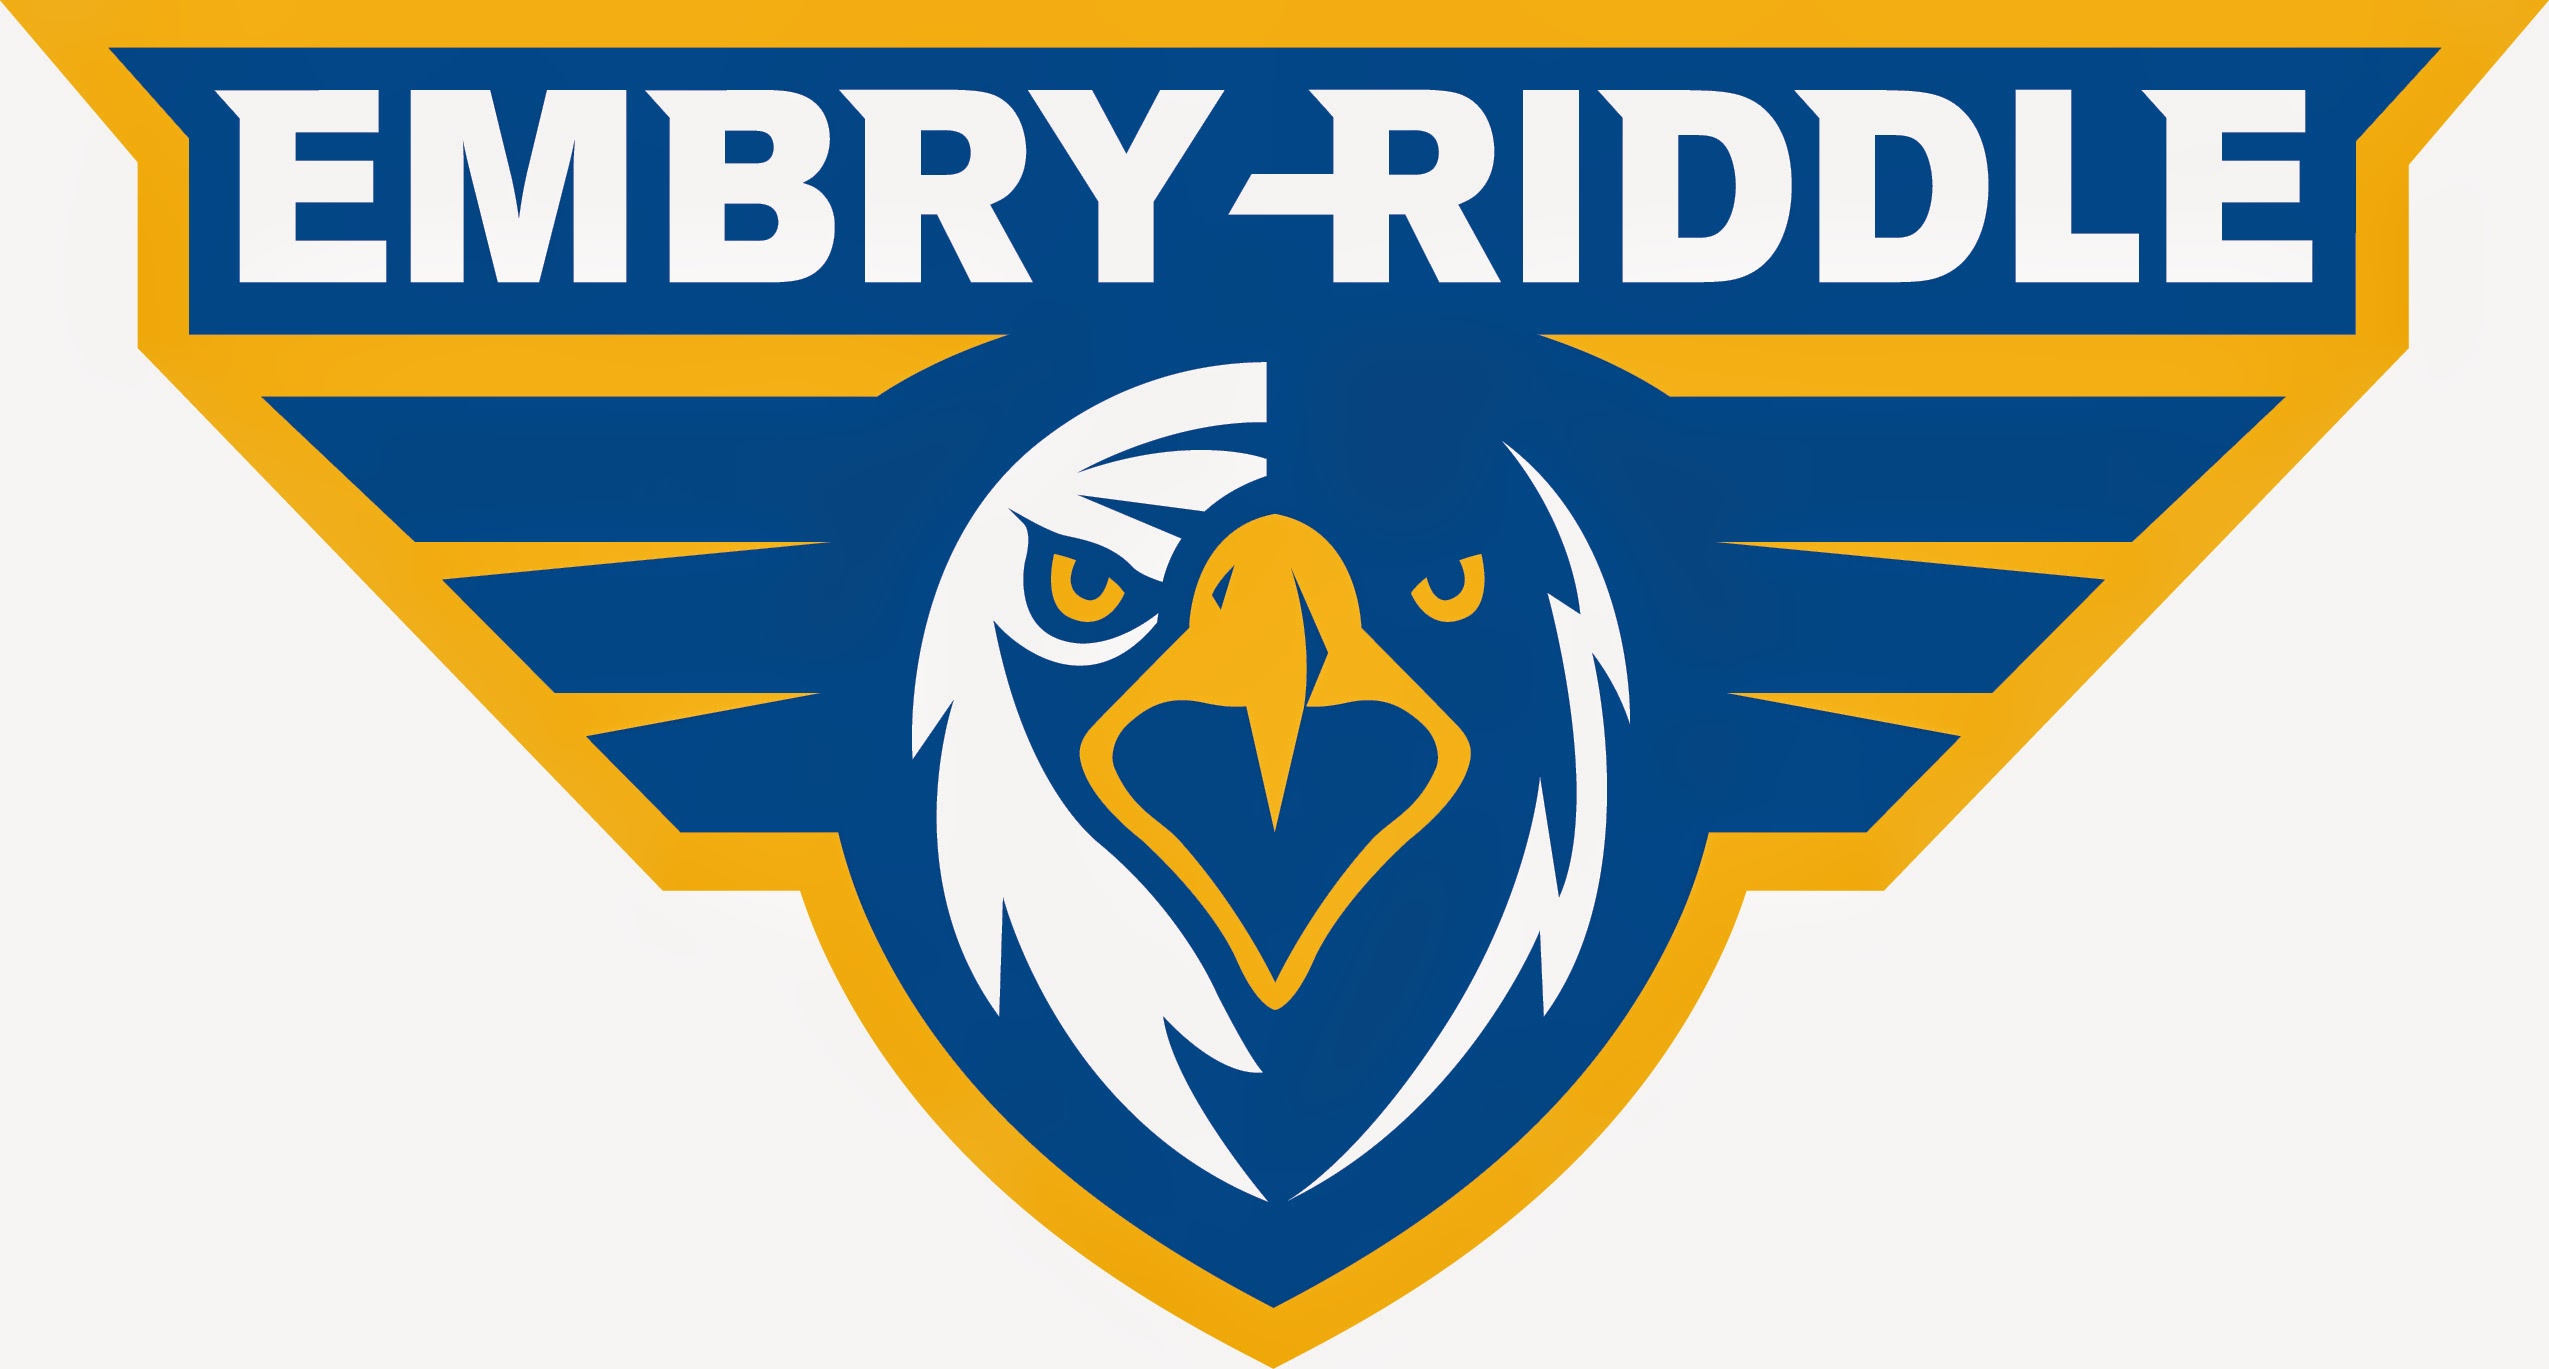 Embry riddle Logos